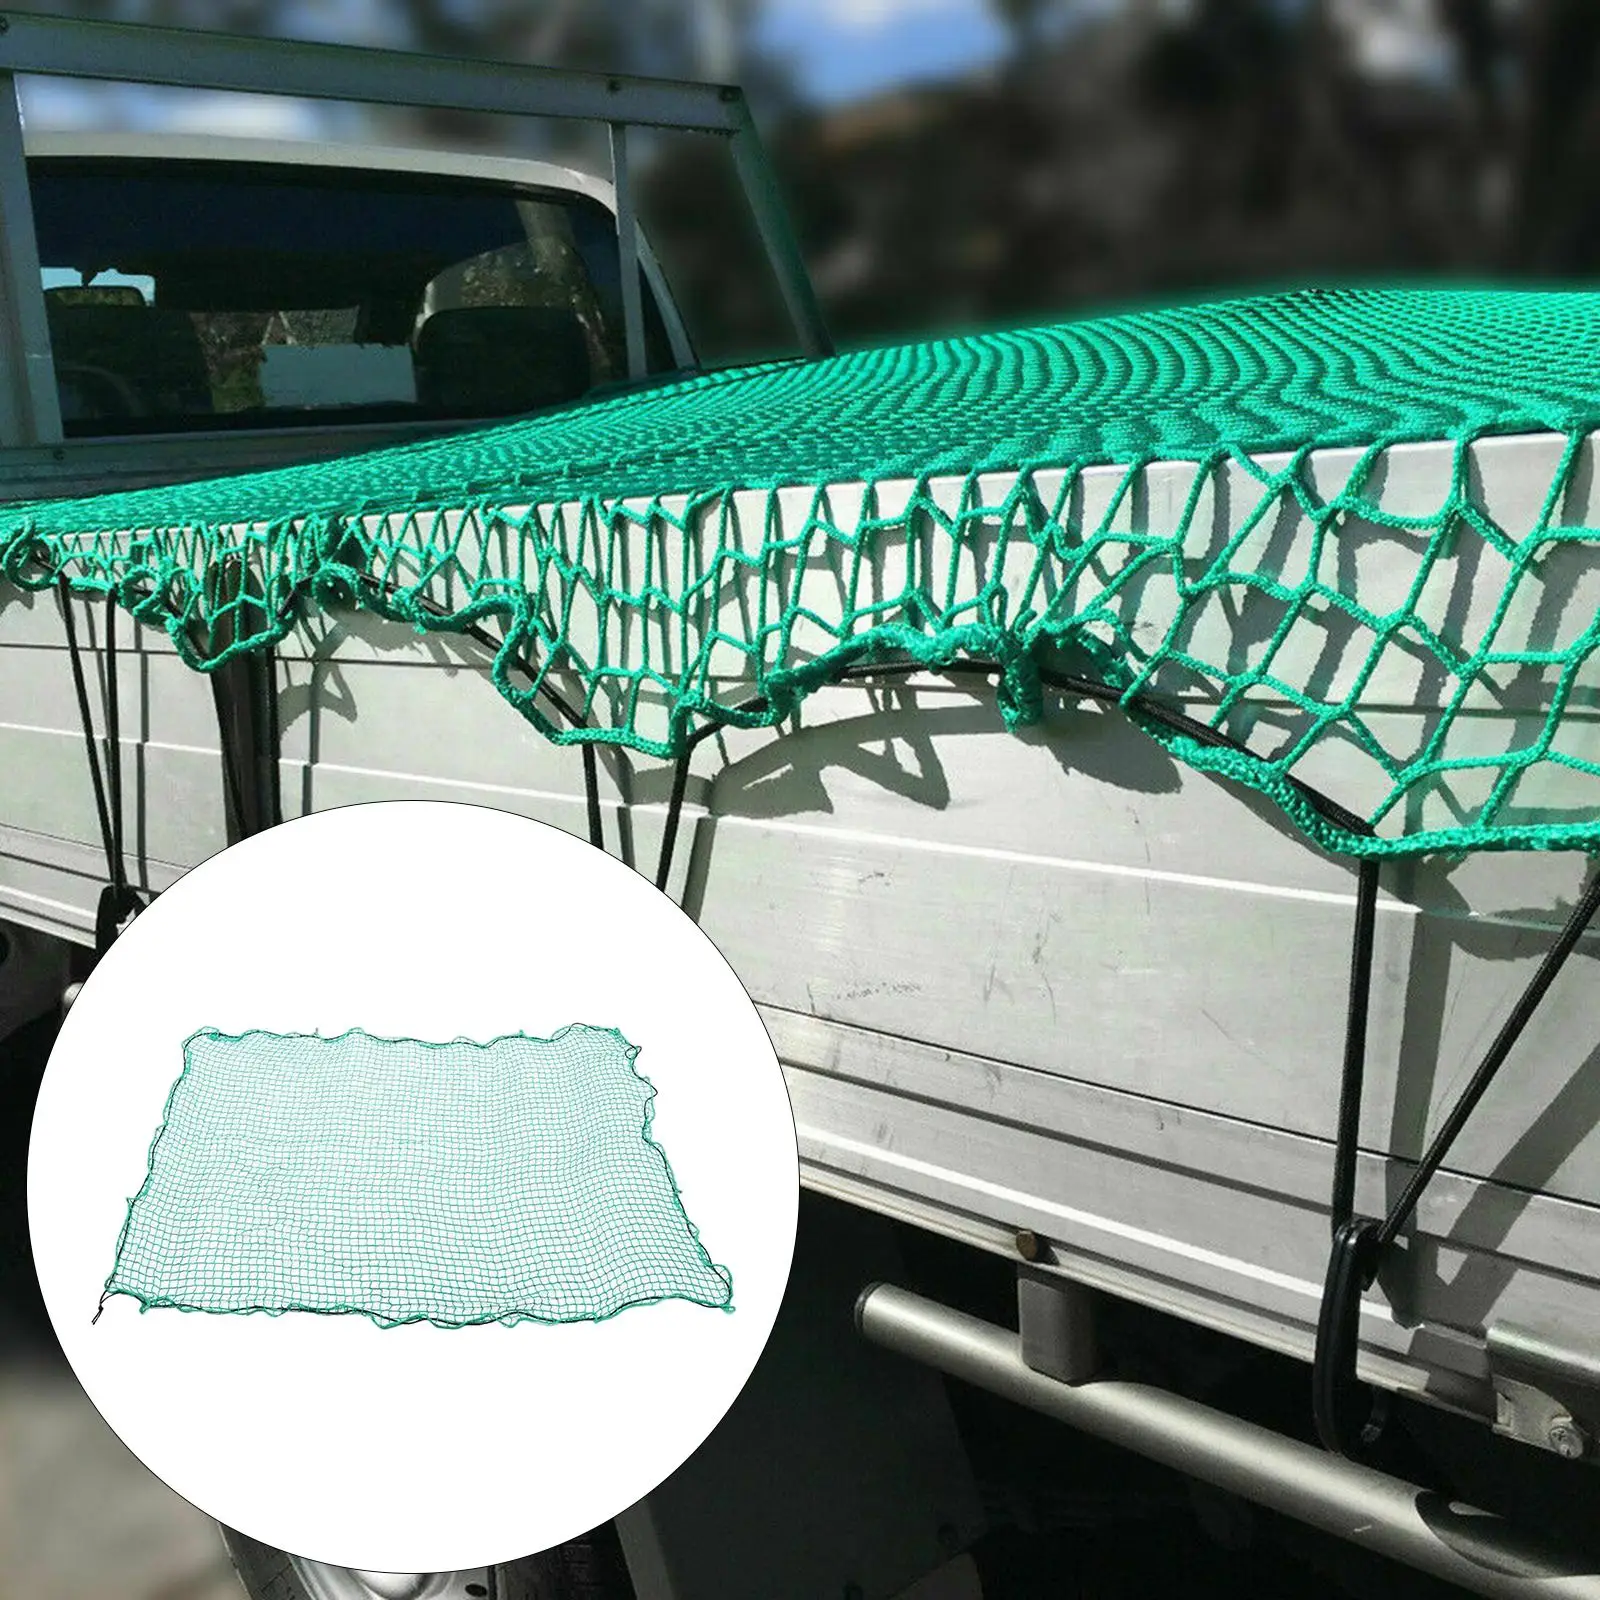 Universal Bungee Cargo Net 5` x 7` Storage Bag  Fit for Pickup Truck